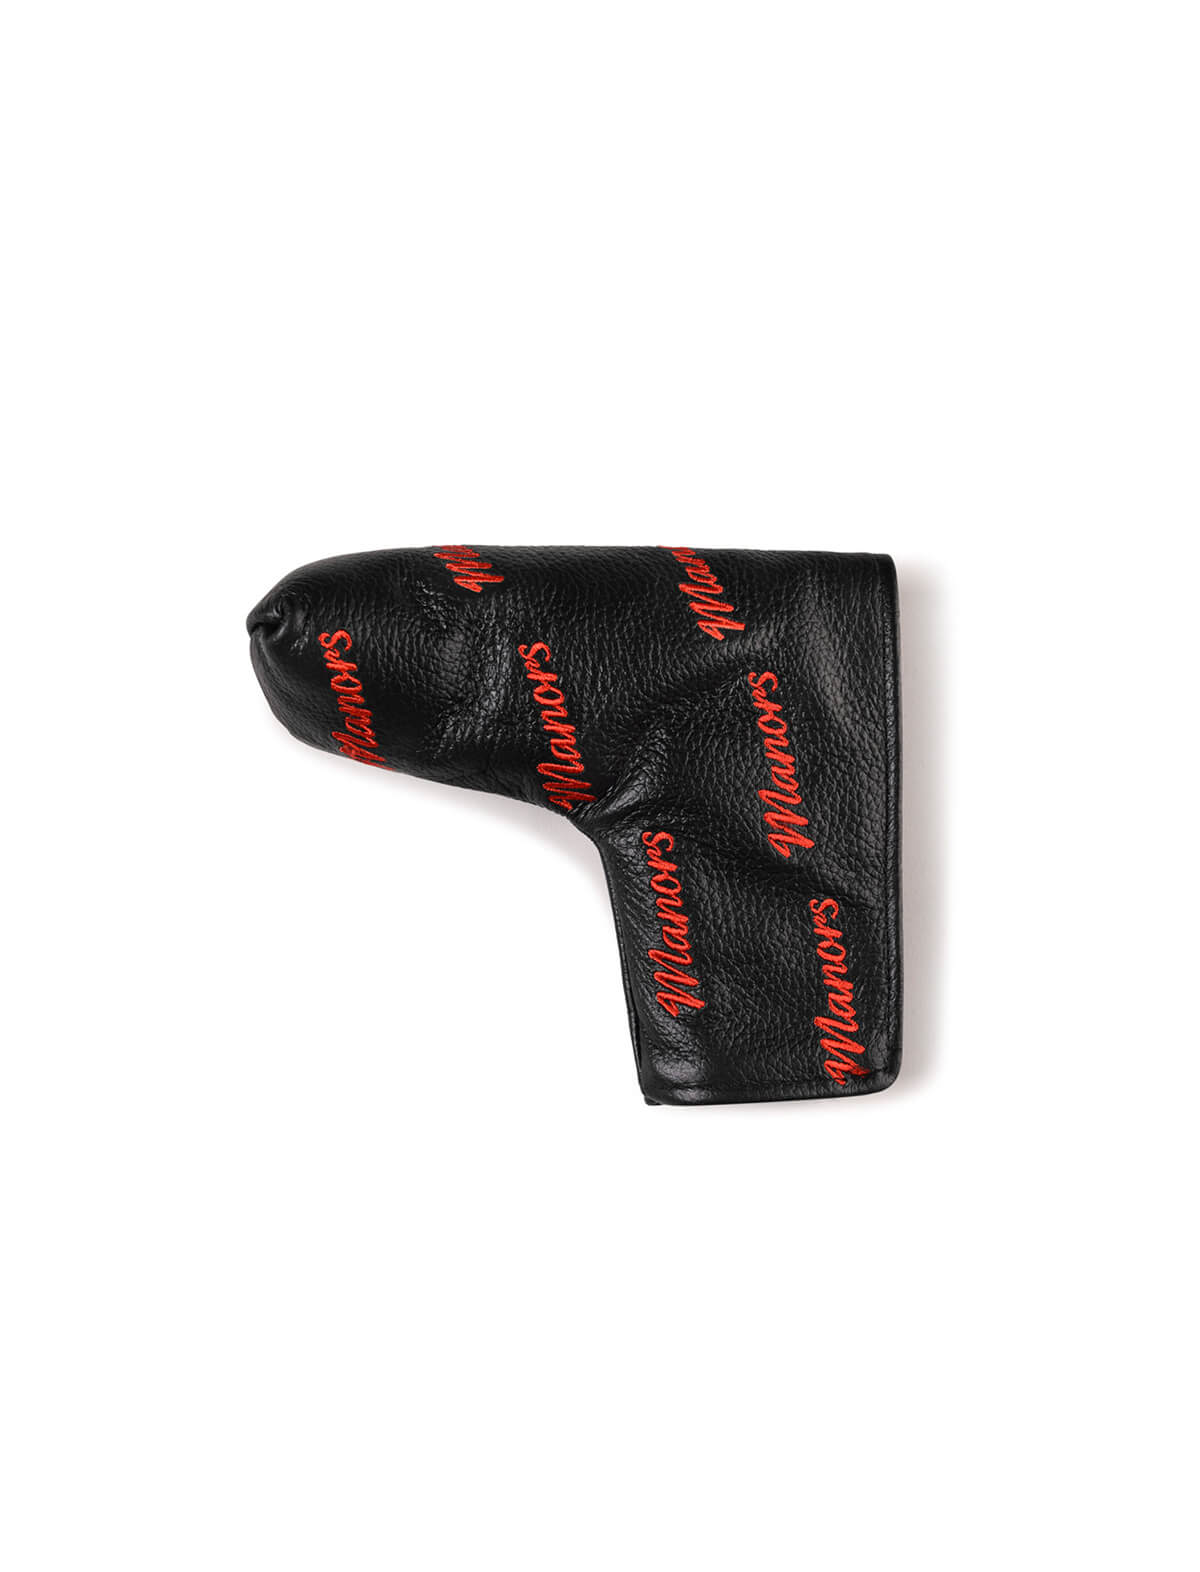 MANORS GOLF Leather Putter Cover in Black